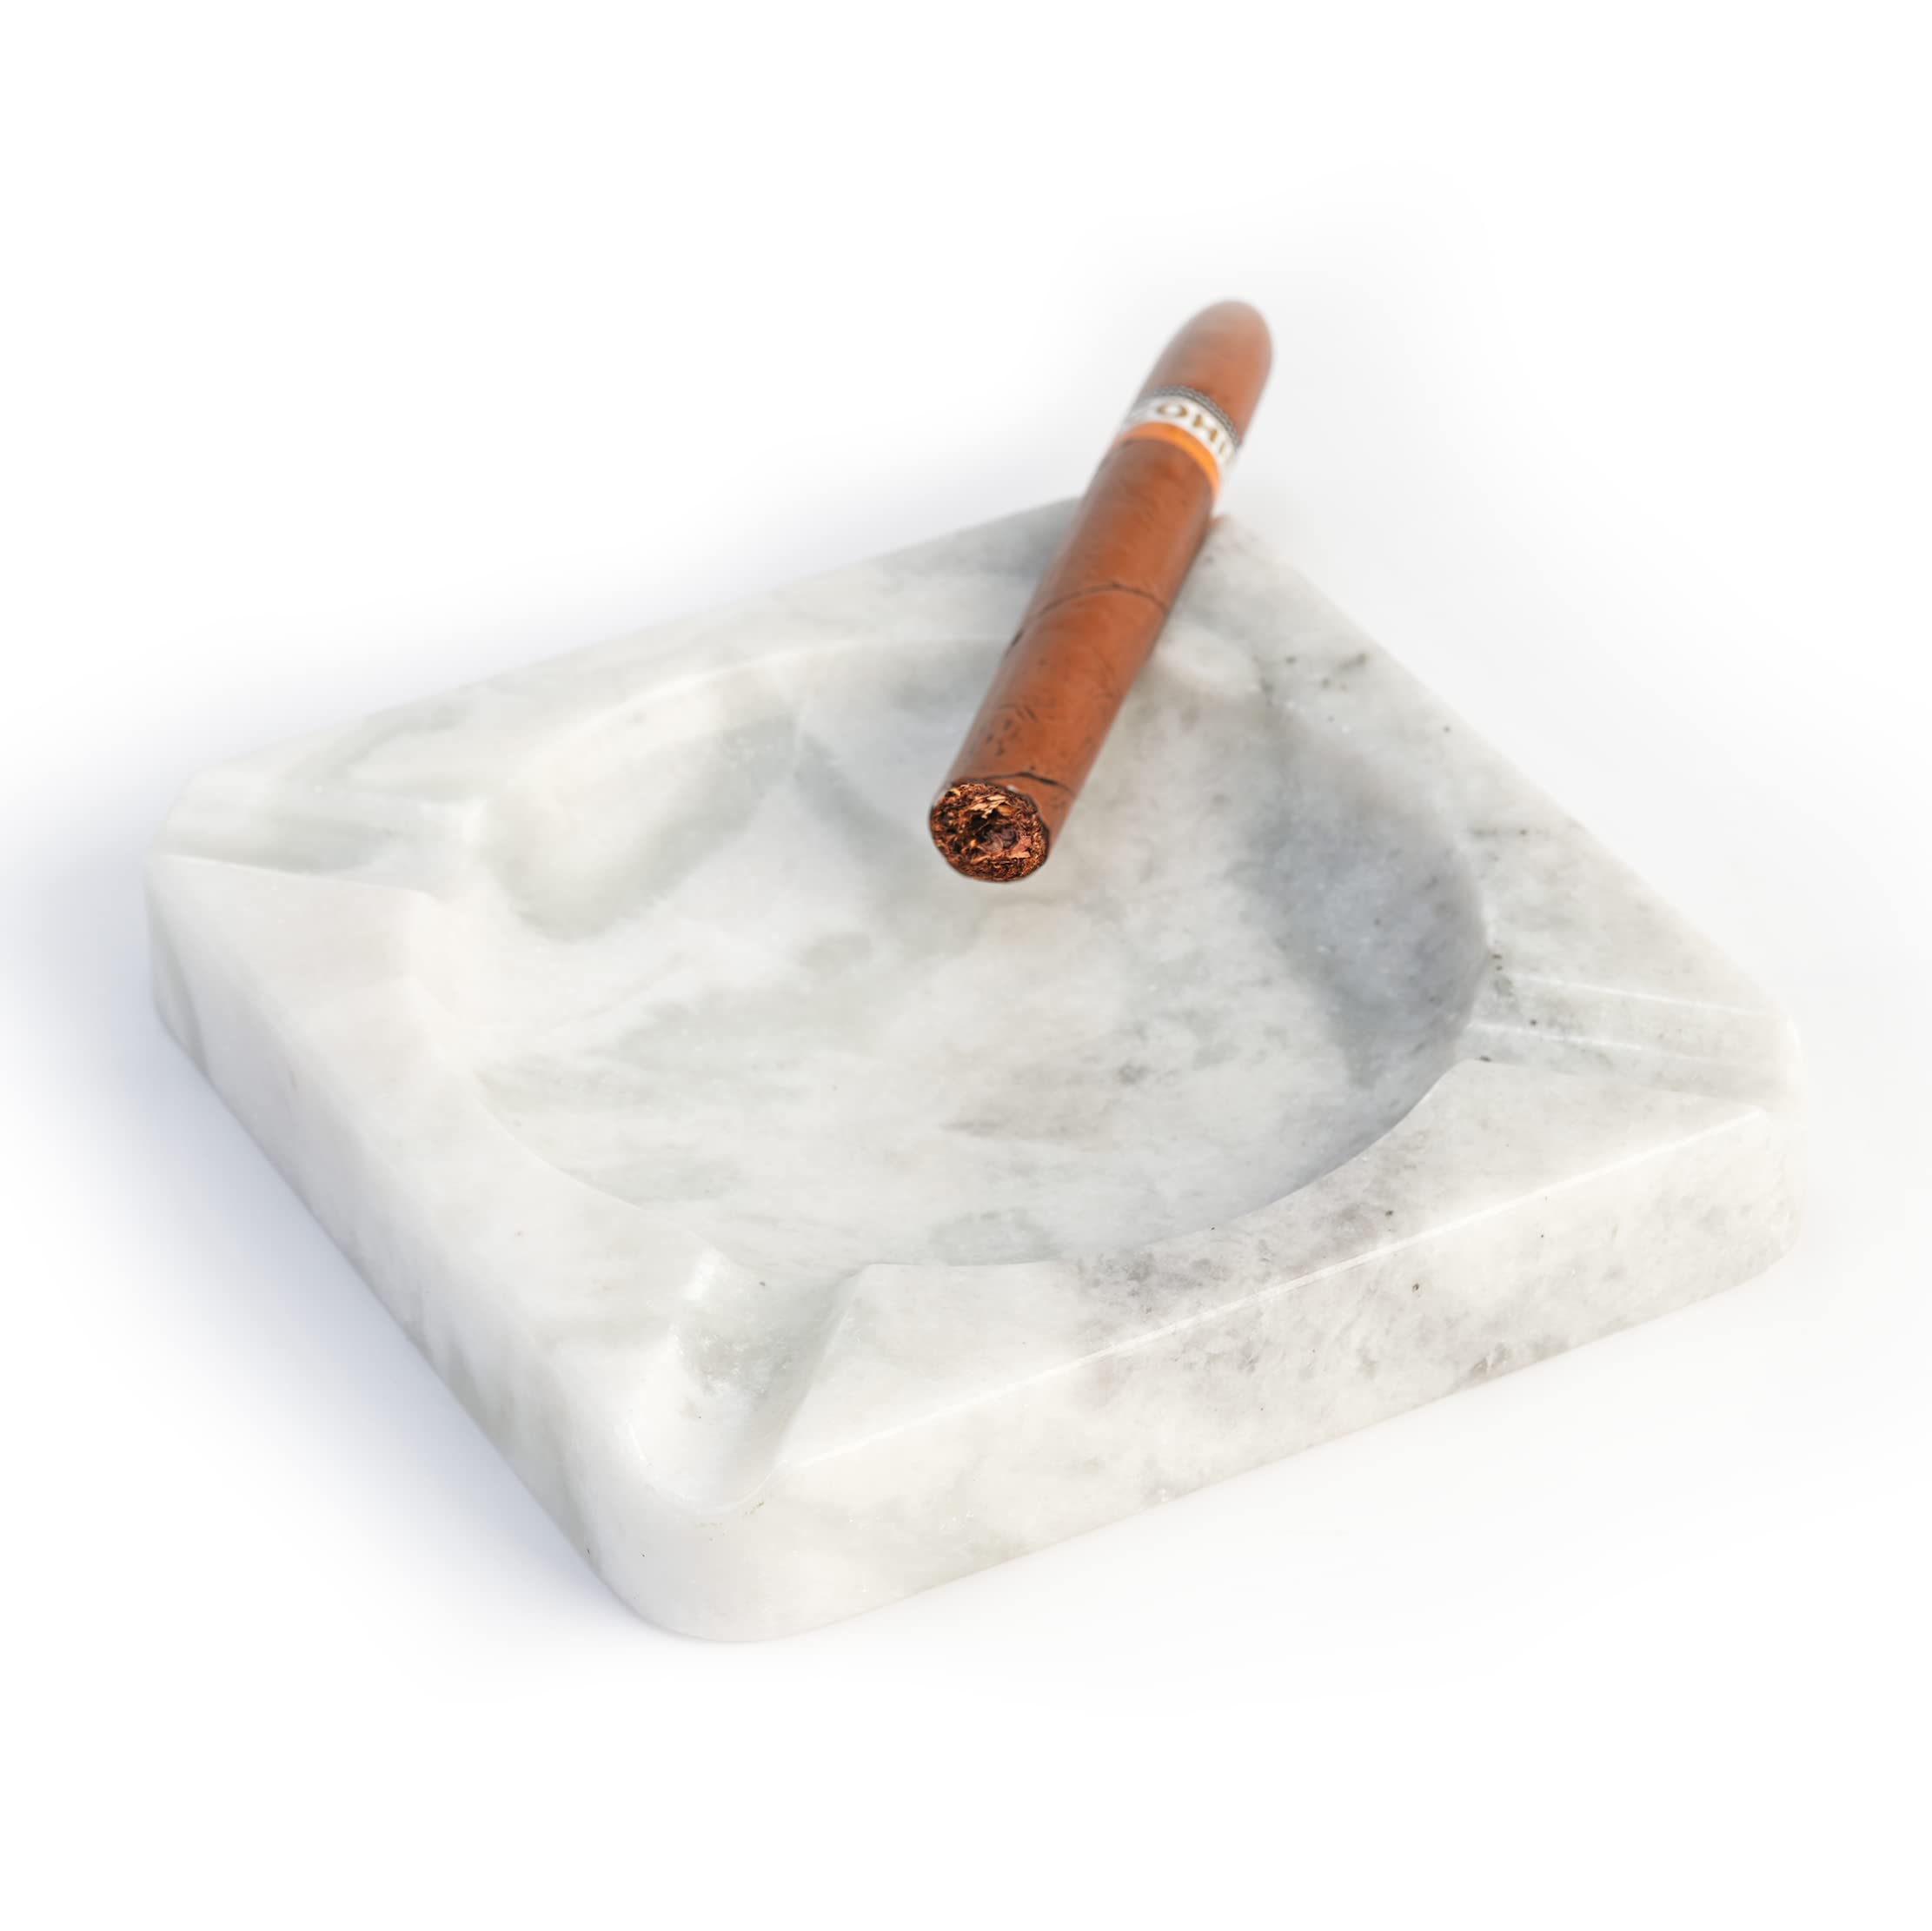 Koville African Natural Marble Cigar Ashtray, 7.28" Large Square Cigarettes Ash Tray, Cool Ashtrays for Patio, Indoor, Smoking Accessory for Home Office Hotel Decor(Namib Fantasy)